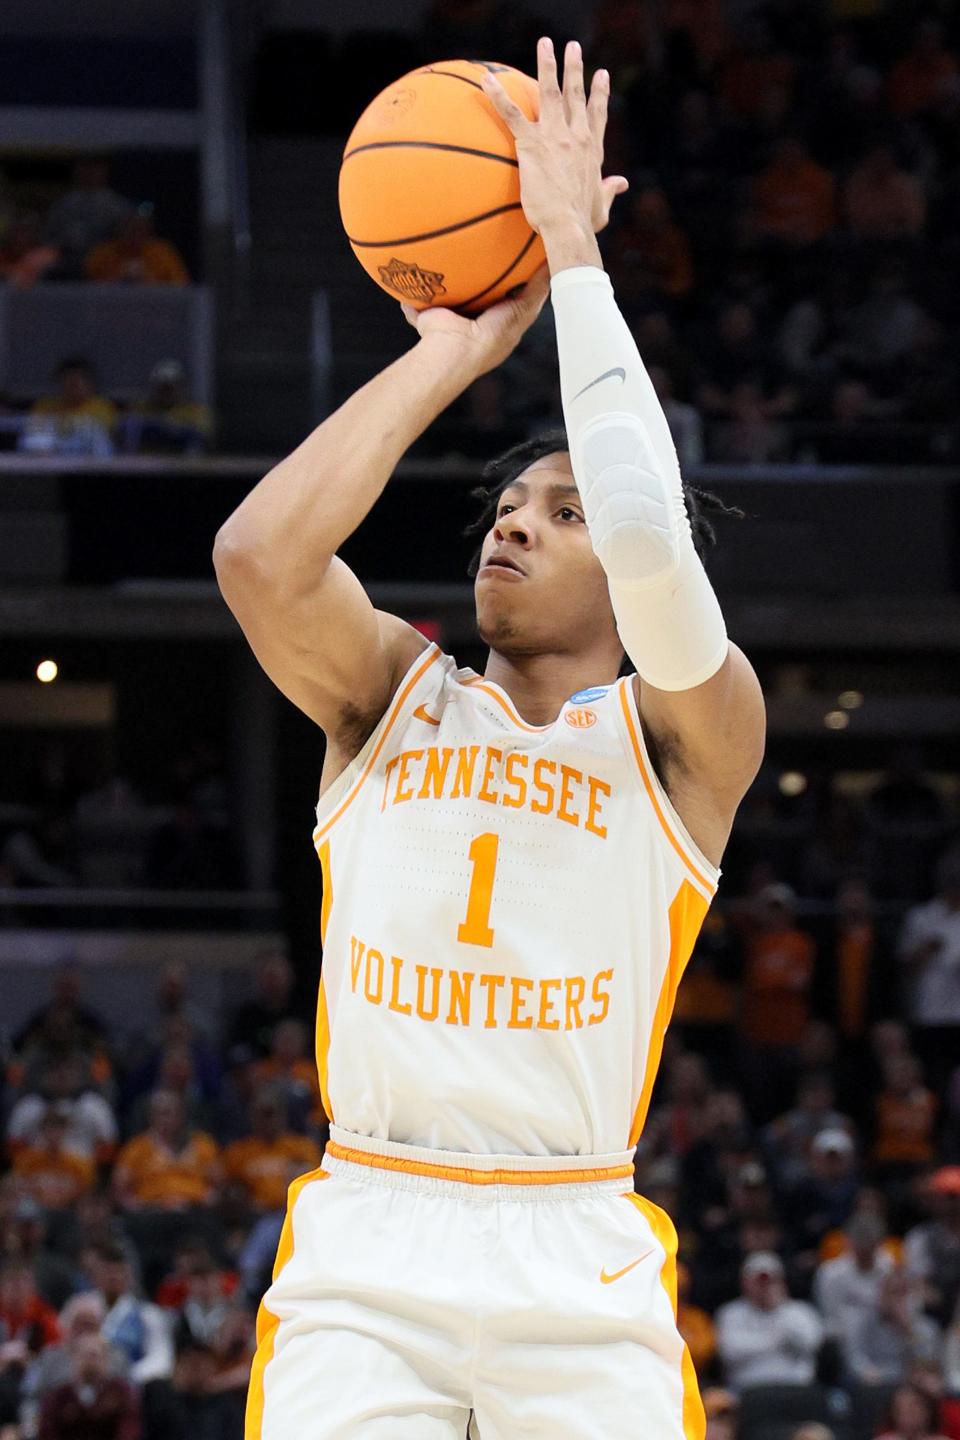 INDIANAPOLIS, INDIANA - MARCH 19: Kennedy Chandler #1 of the Tennessee Volunteers shoots against the Michigan Wolverines in the first half during the second round of the 2022 NCAA Men's Basketball Tournament at Gainbridge Fieldhouse on March 19, 2022 in Indianapolis, Indiana. (Photo by Andy Lyons/Getty Images)